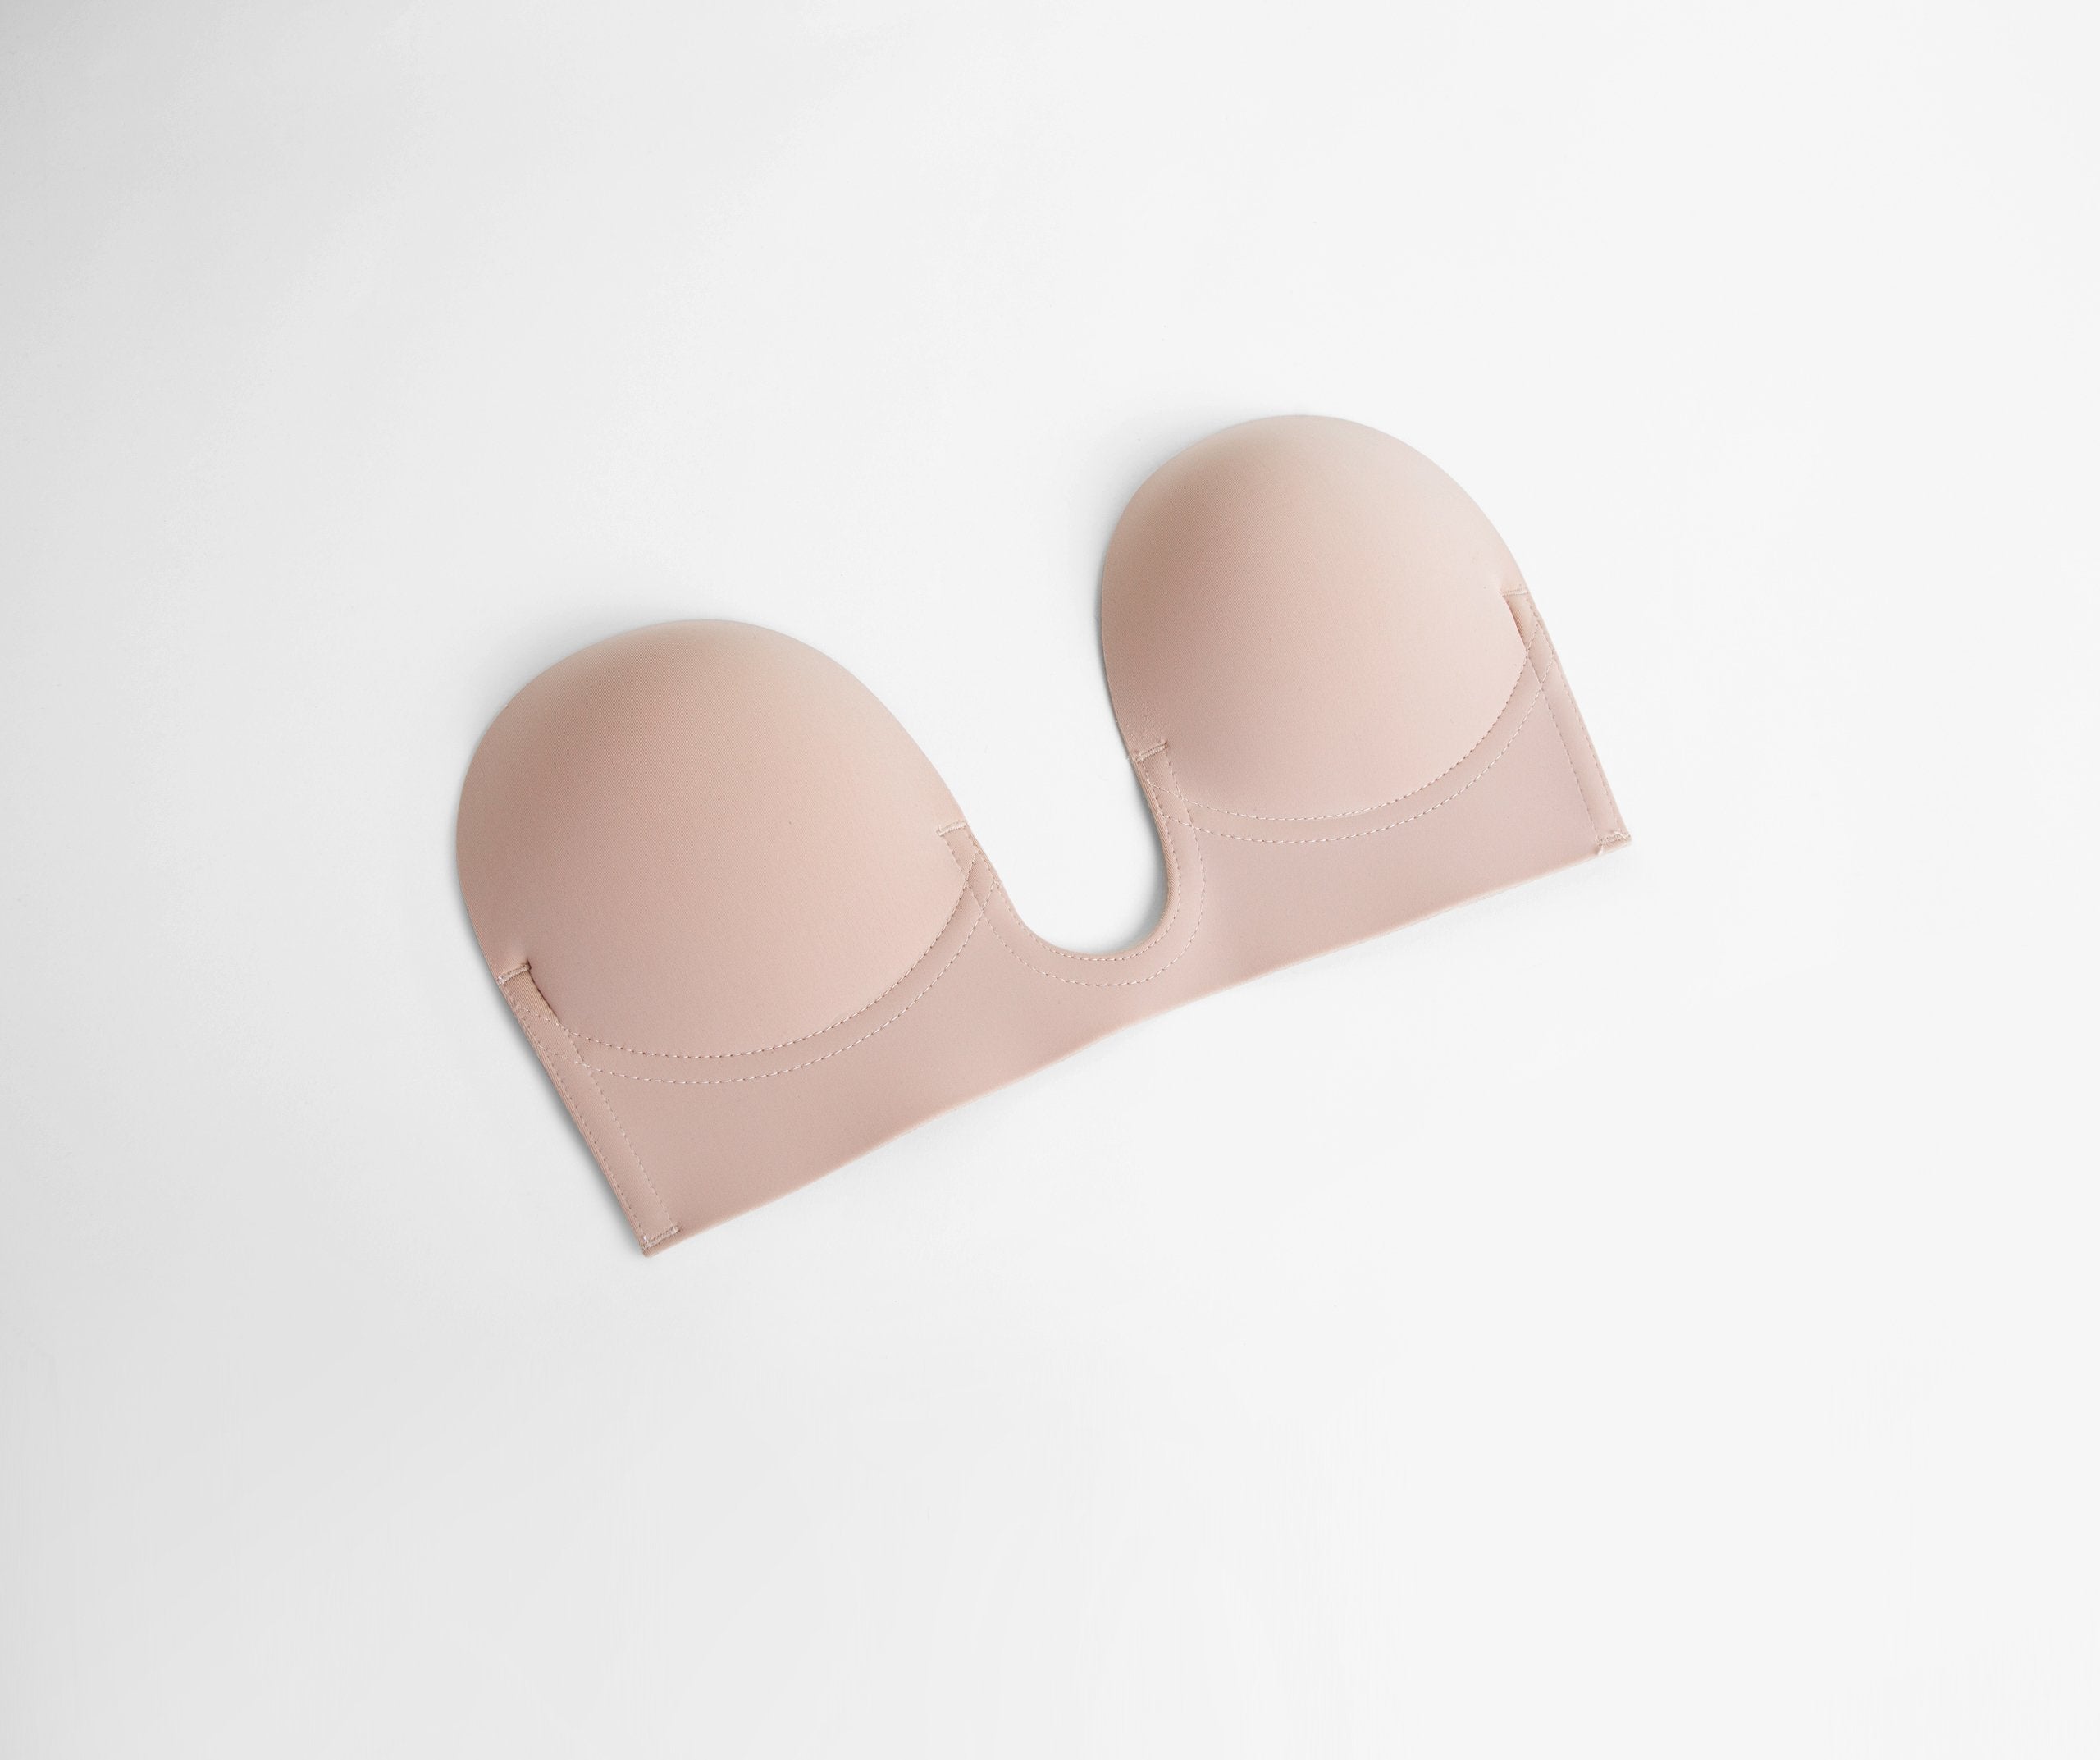 Plunging Adhesive Bra - Lady Occasions